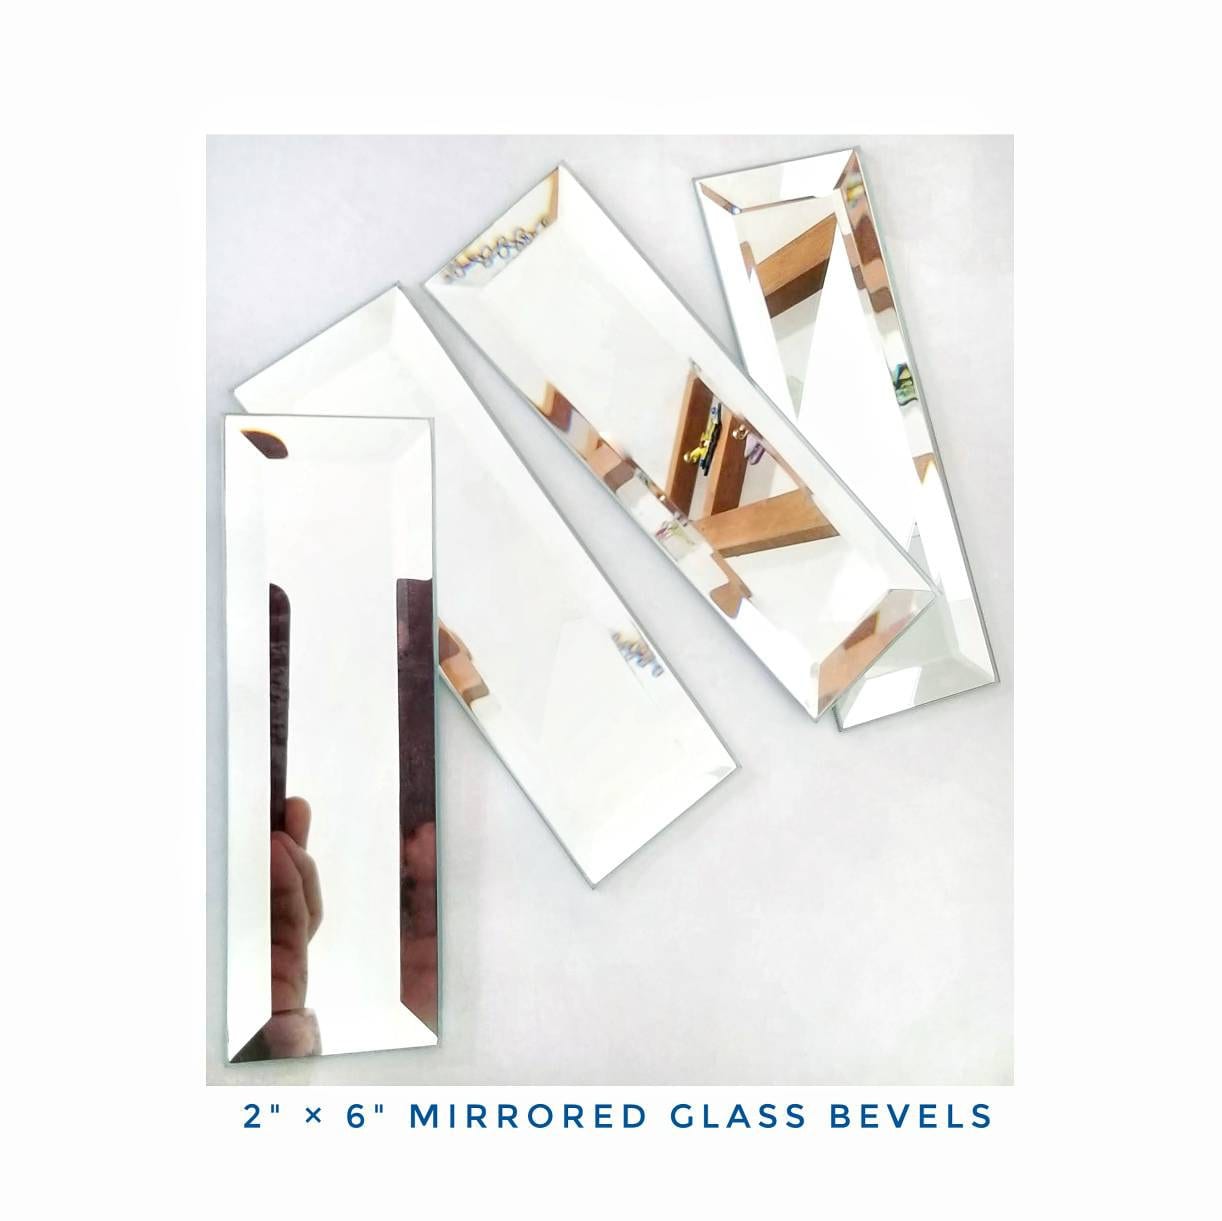 5 Mirror Tile Squares 3 x 3 inch Square Shape Real GLASS small Craft  crafting MIRRORS 242412